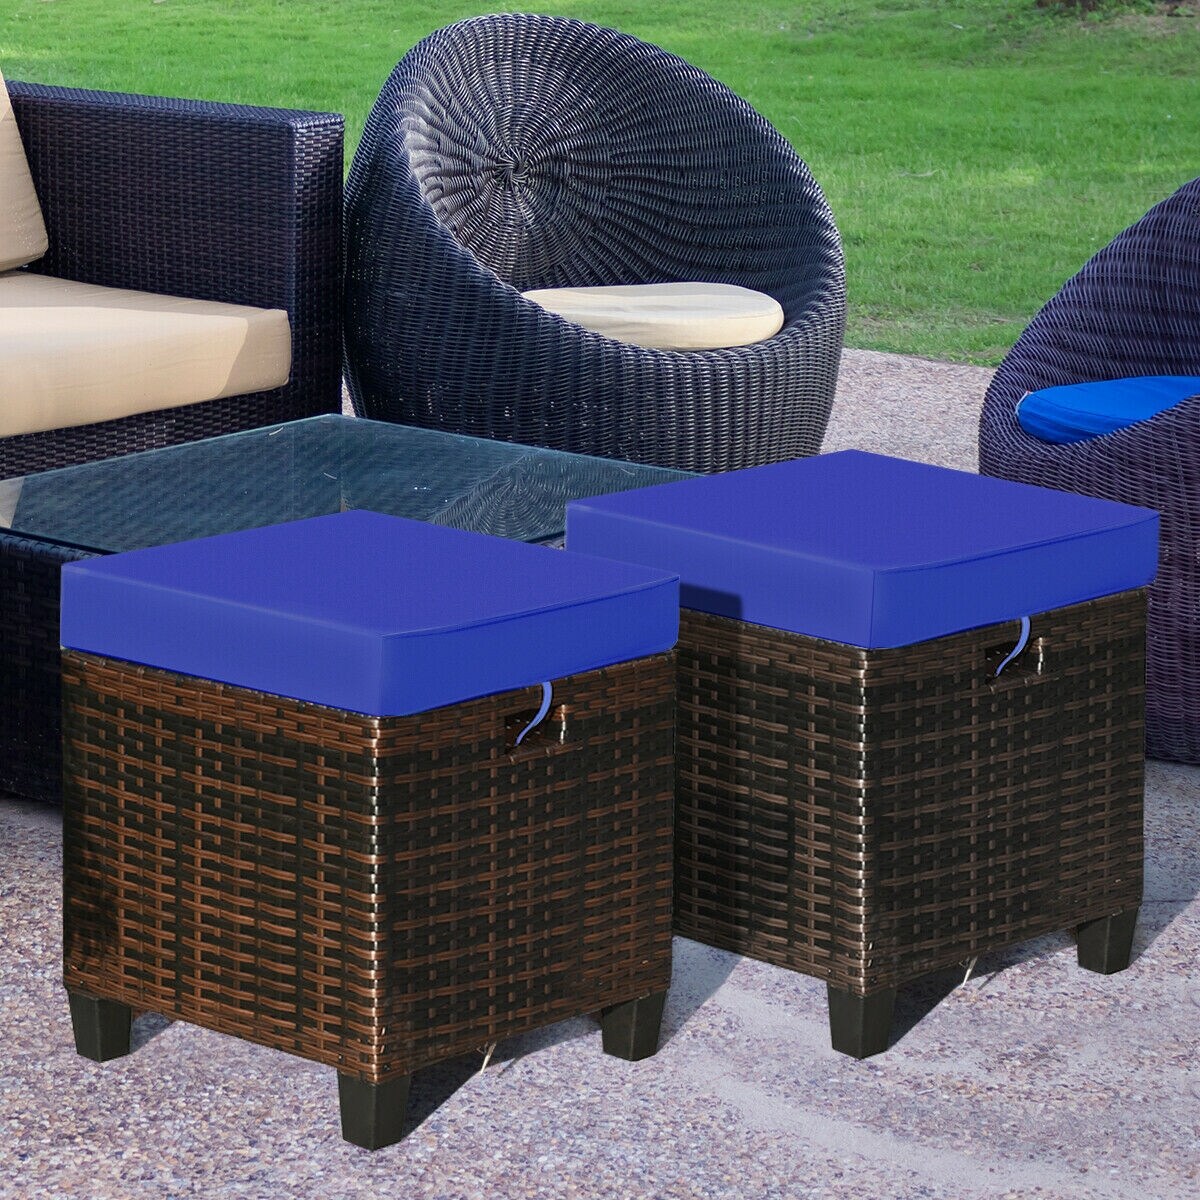 Happygrill 2 Pieces Patio Ottoman Set Outdoor Rattan Wicker Ottoman Seat with Removable Cushions Patio Furniture Footstool Footrest Seat